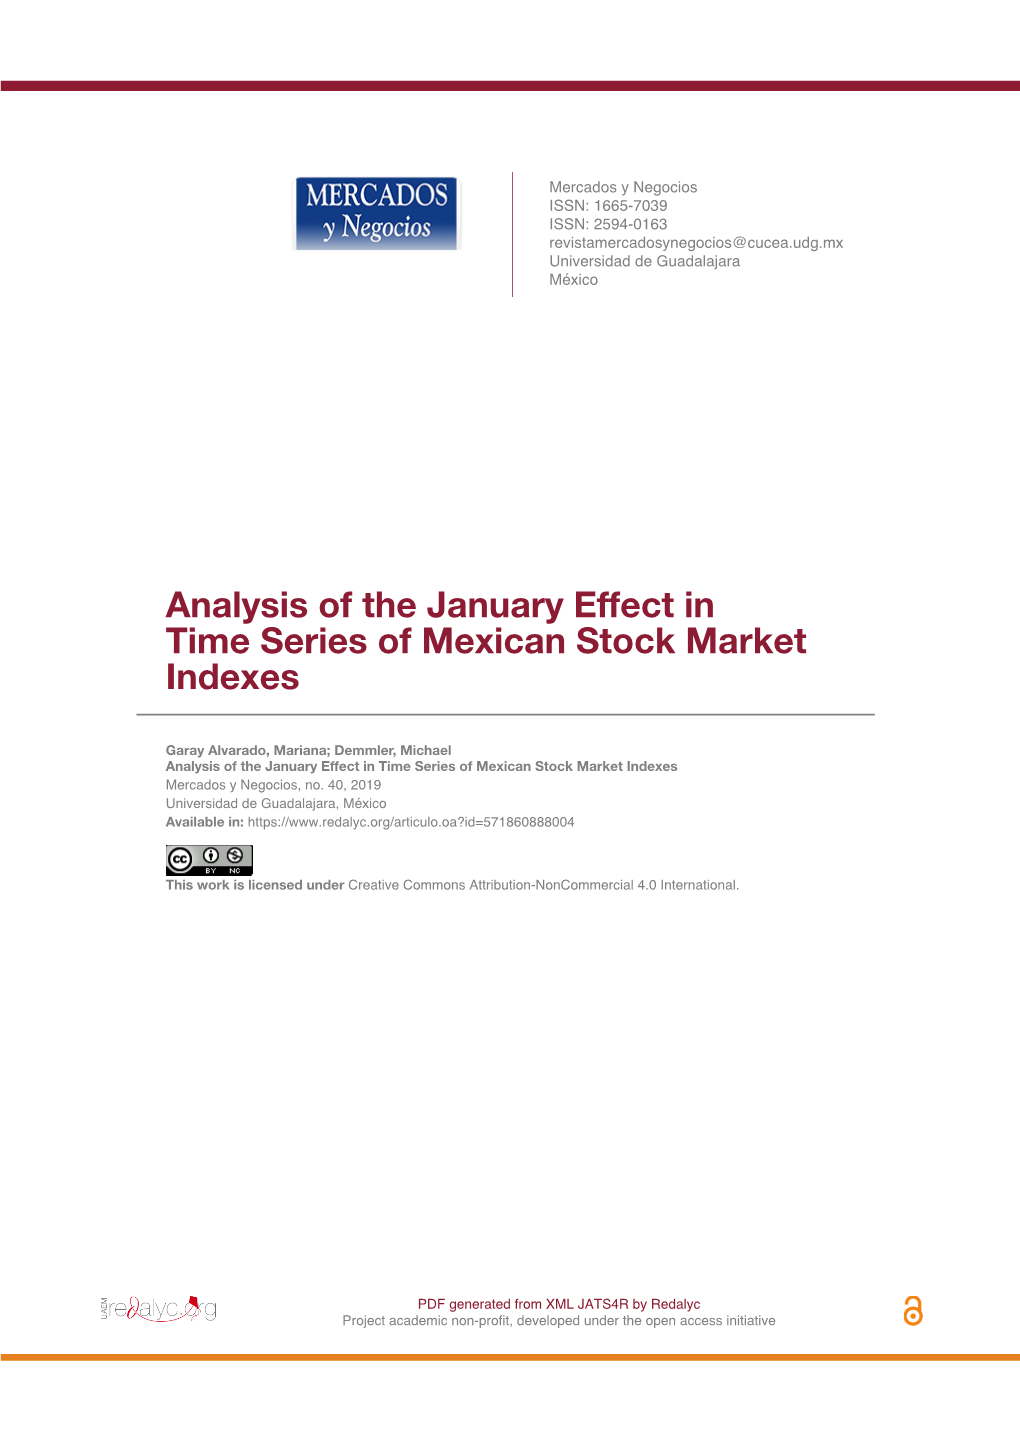 Analysis of the January Effect in Time Series of Mexican Stock Market Indexes